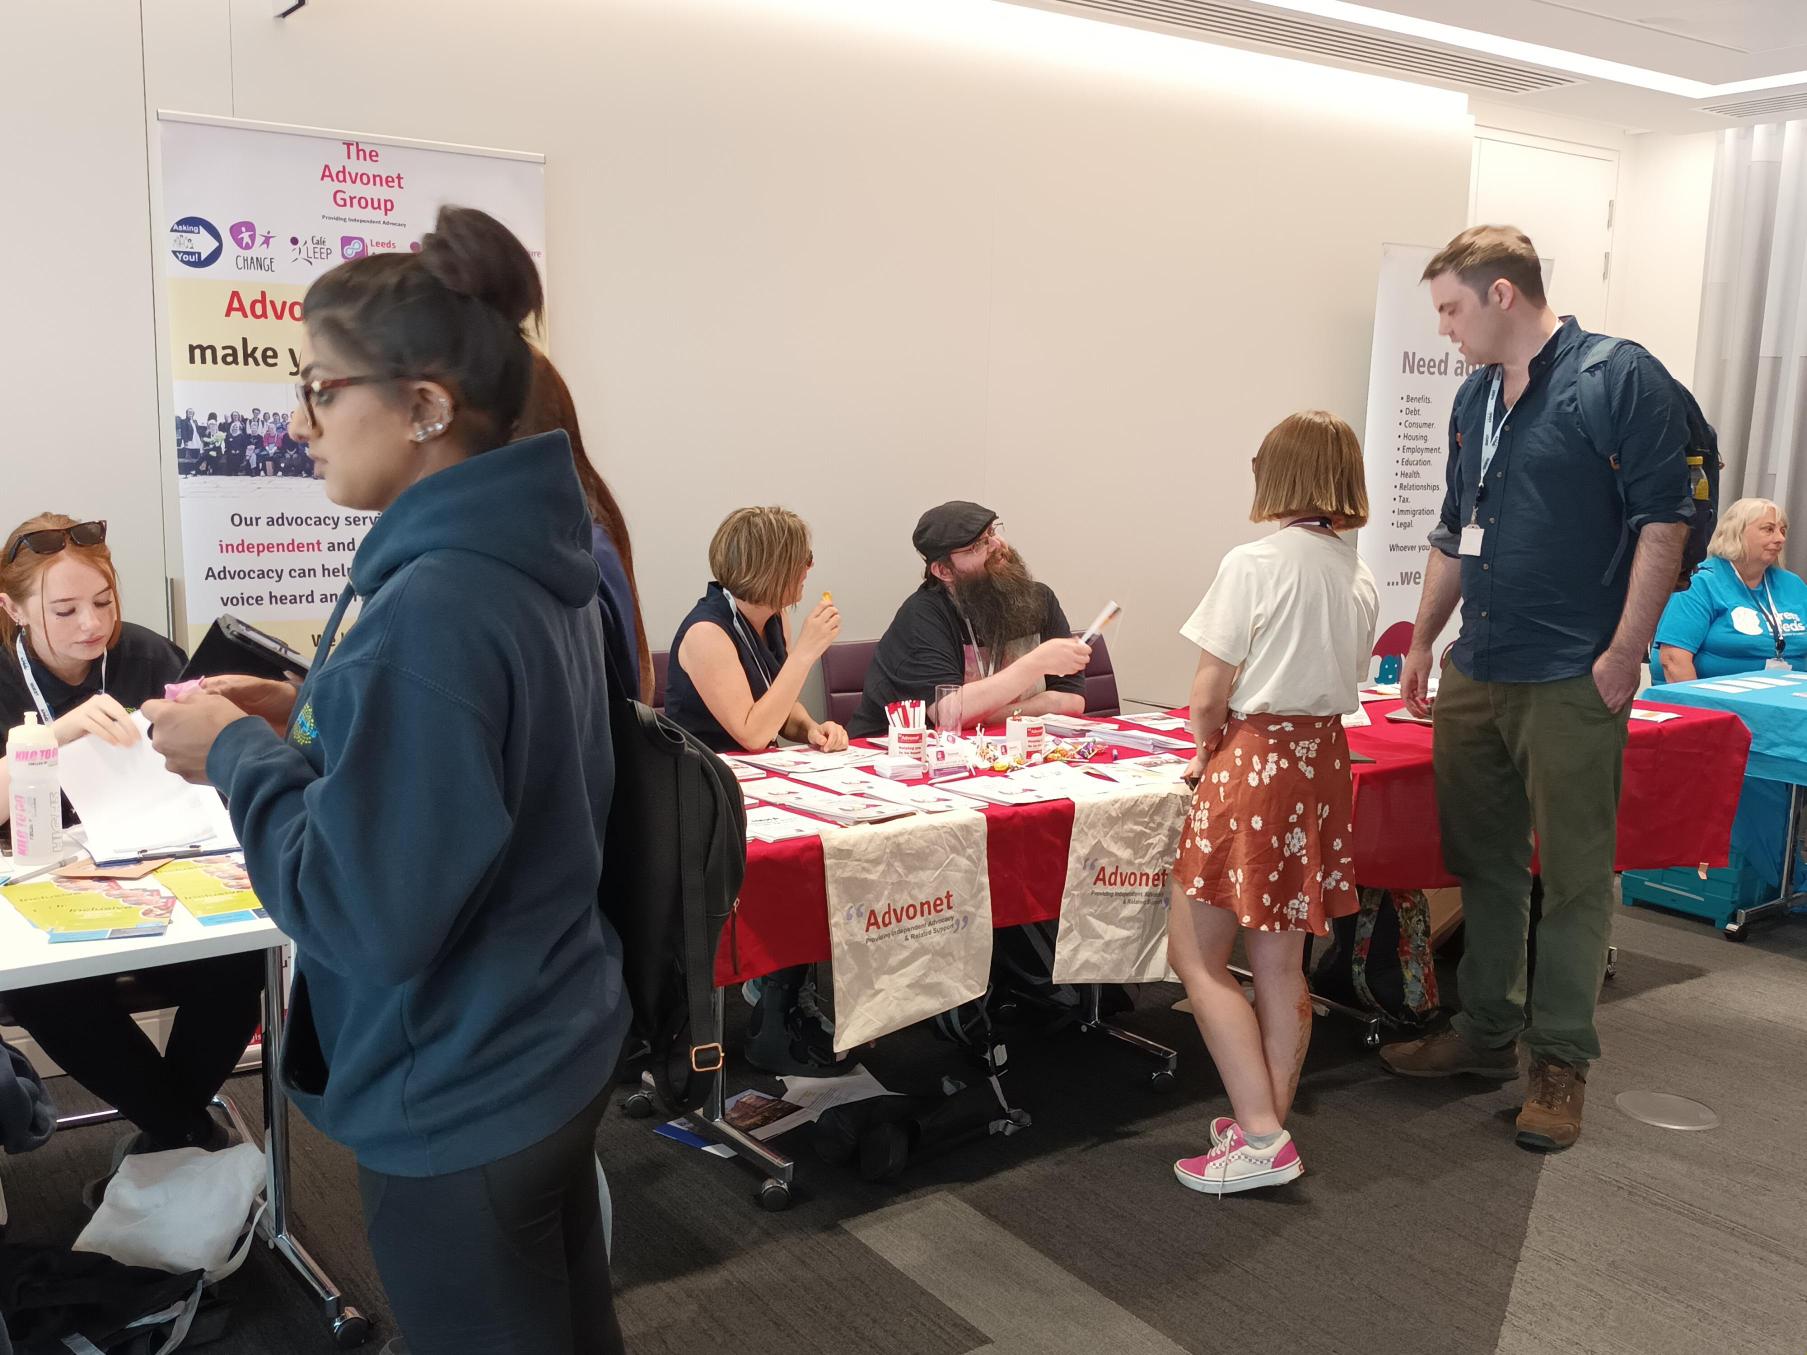 An image of members of the Leeds Autism AIM team at a stall at an information event. The stall has a red tablecloth over it, with leaflets, flyers, tote bags and other items on top of it.